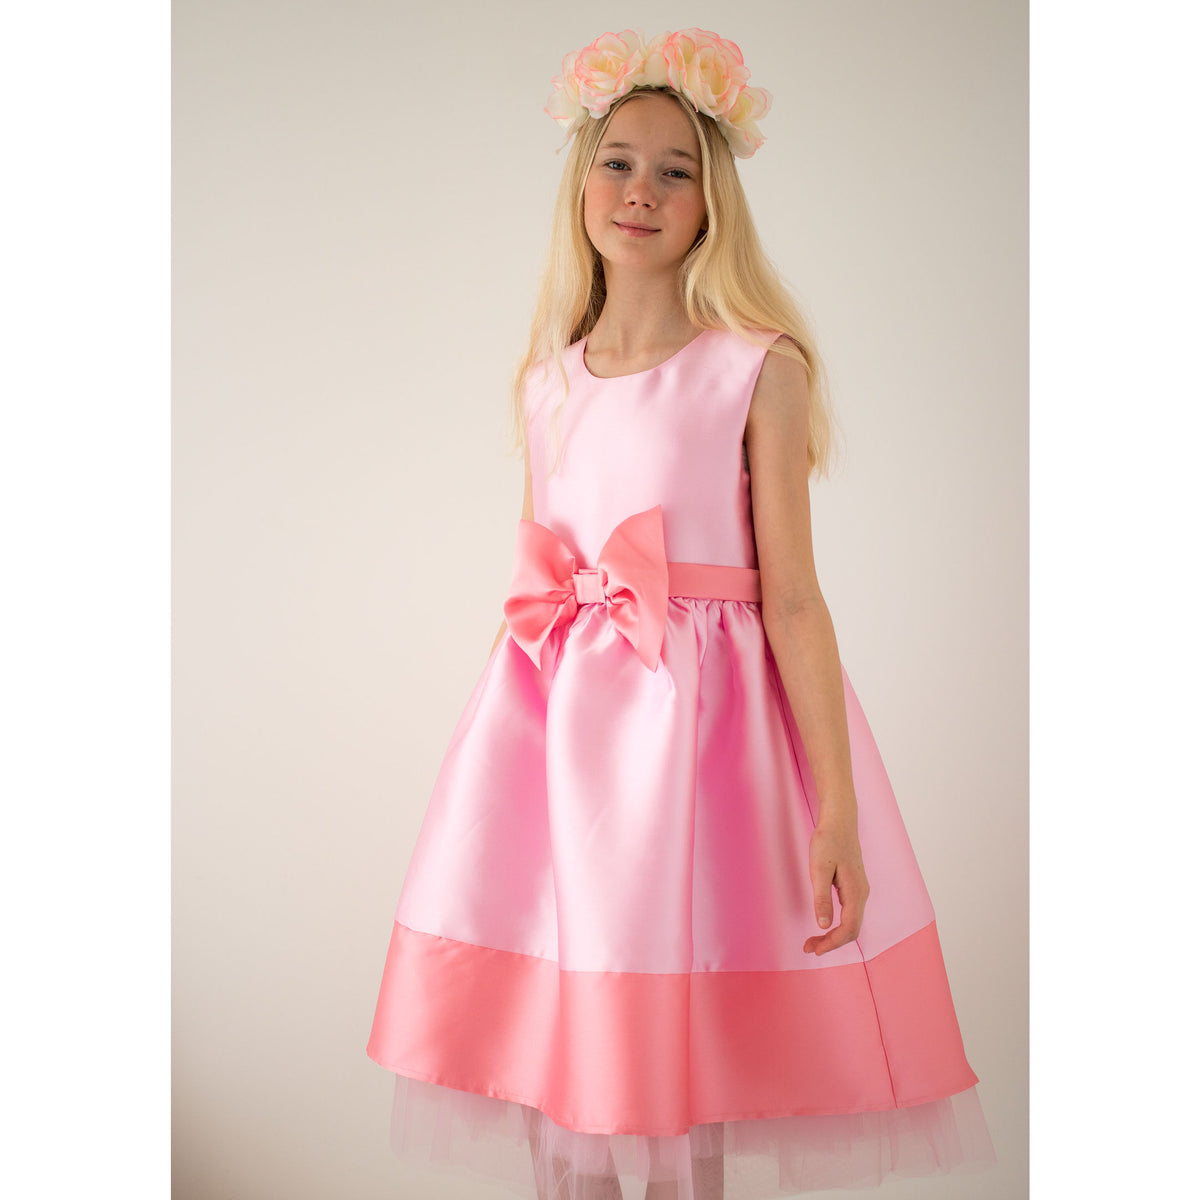 Girls Party Dress Florence Candy Pink Taffeta Bow | Holly Hastie London